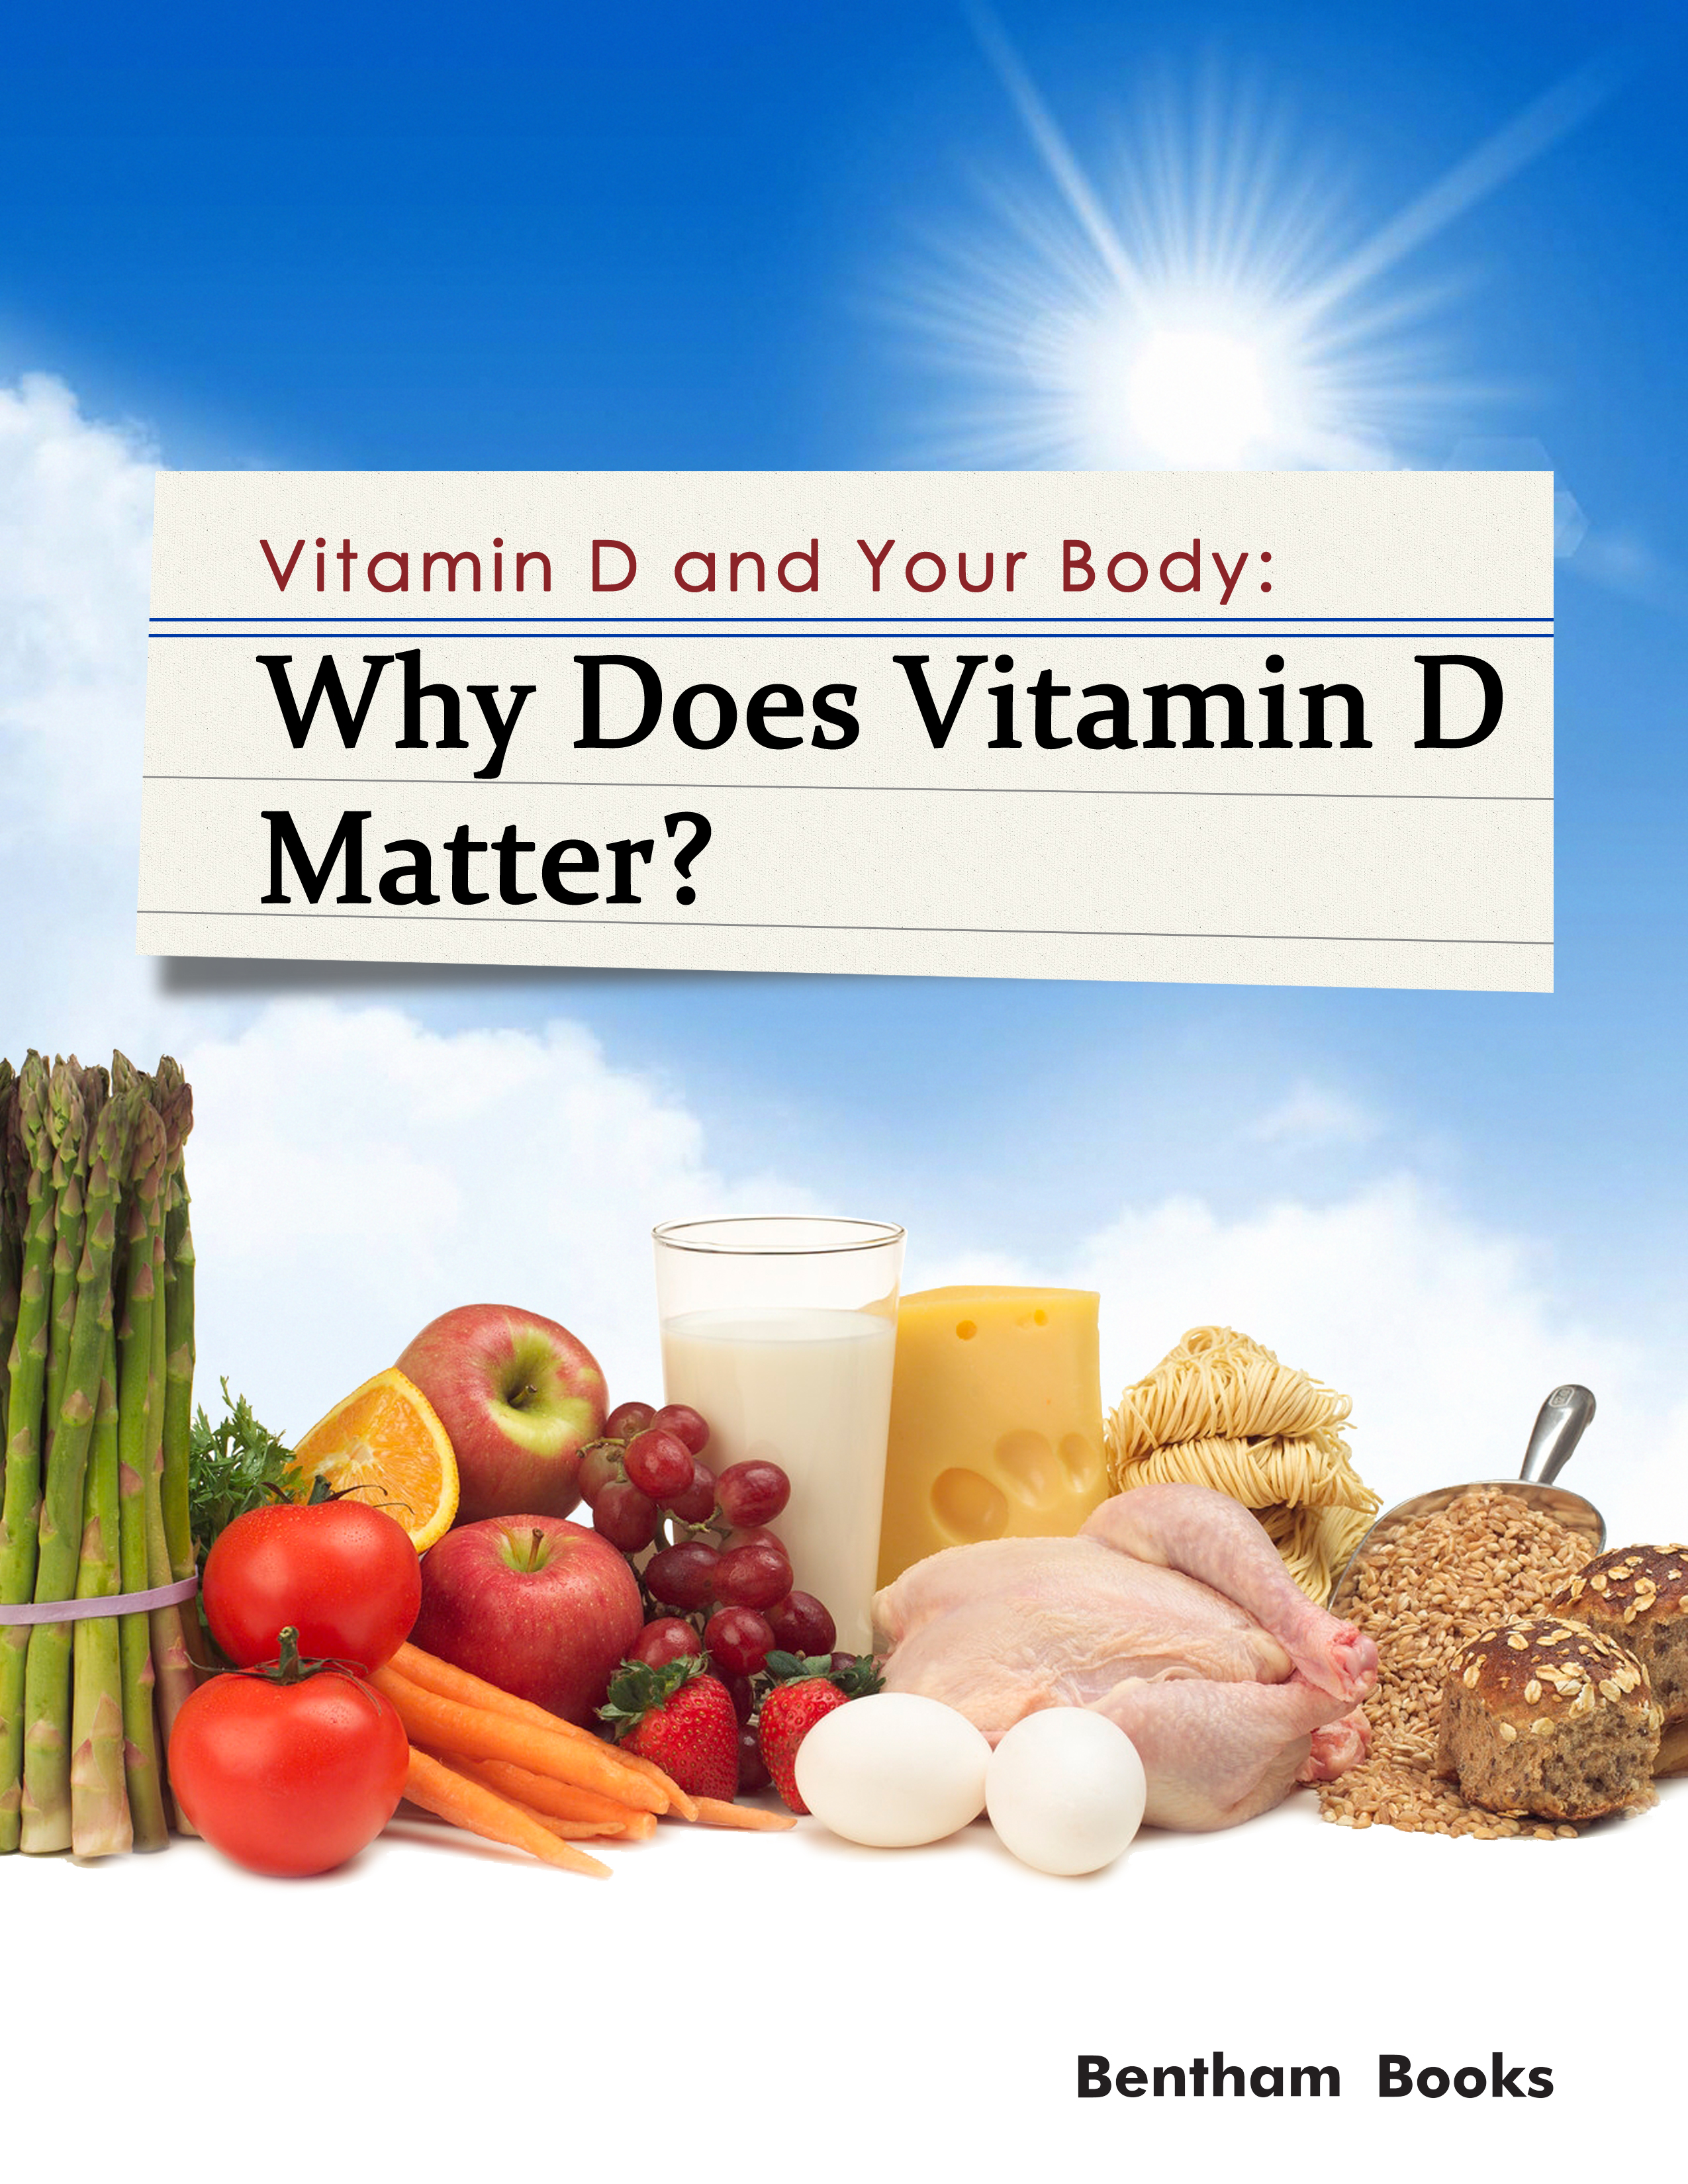 Vitamin D and Your Body